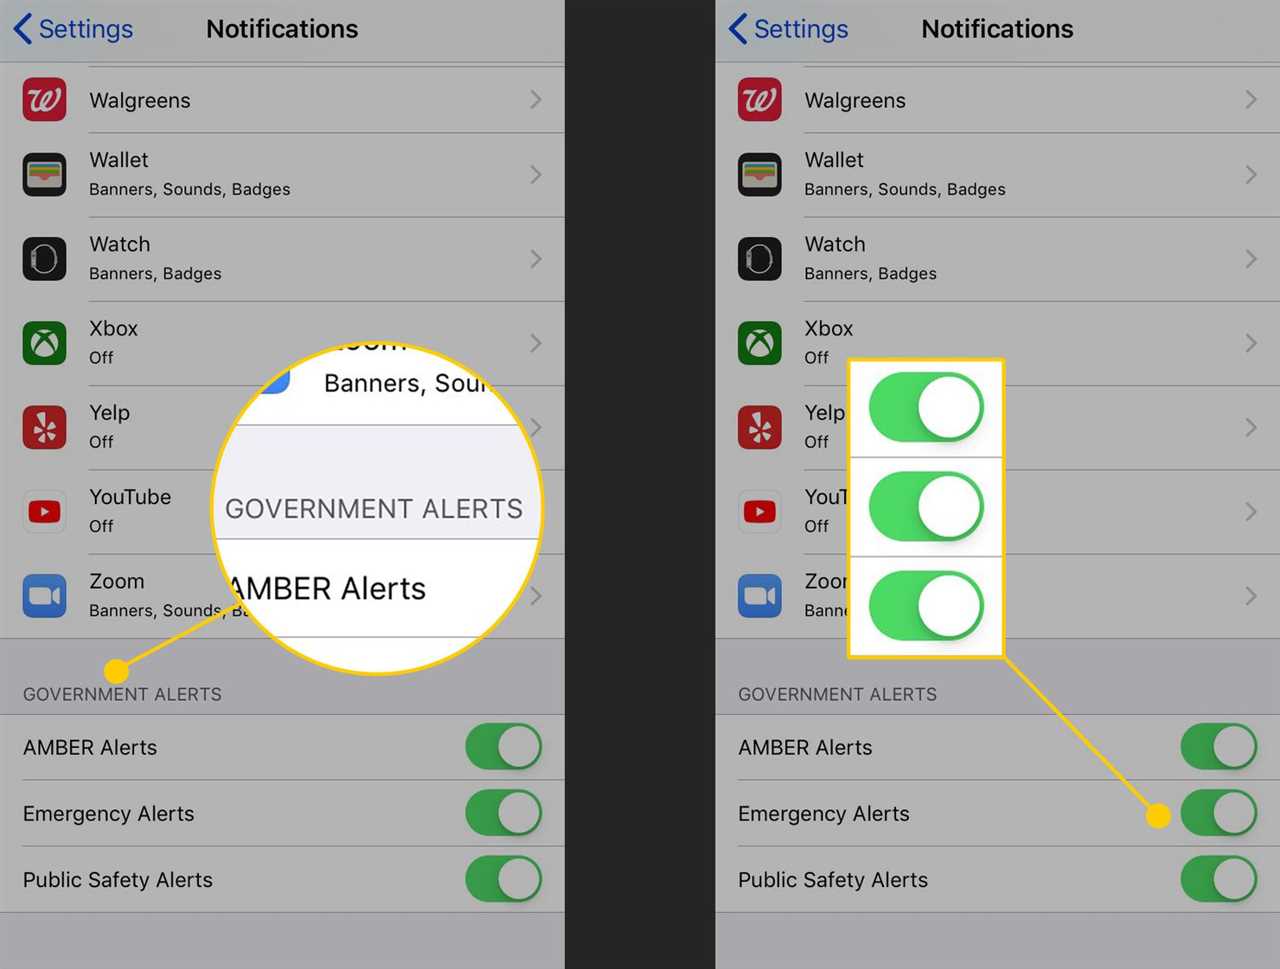 What are Amber Alerts?